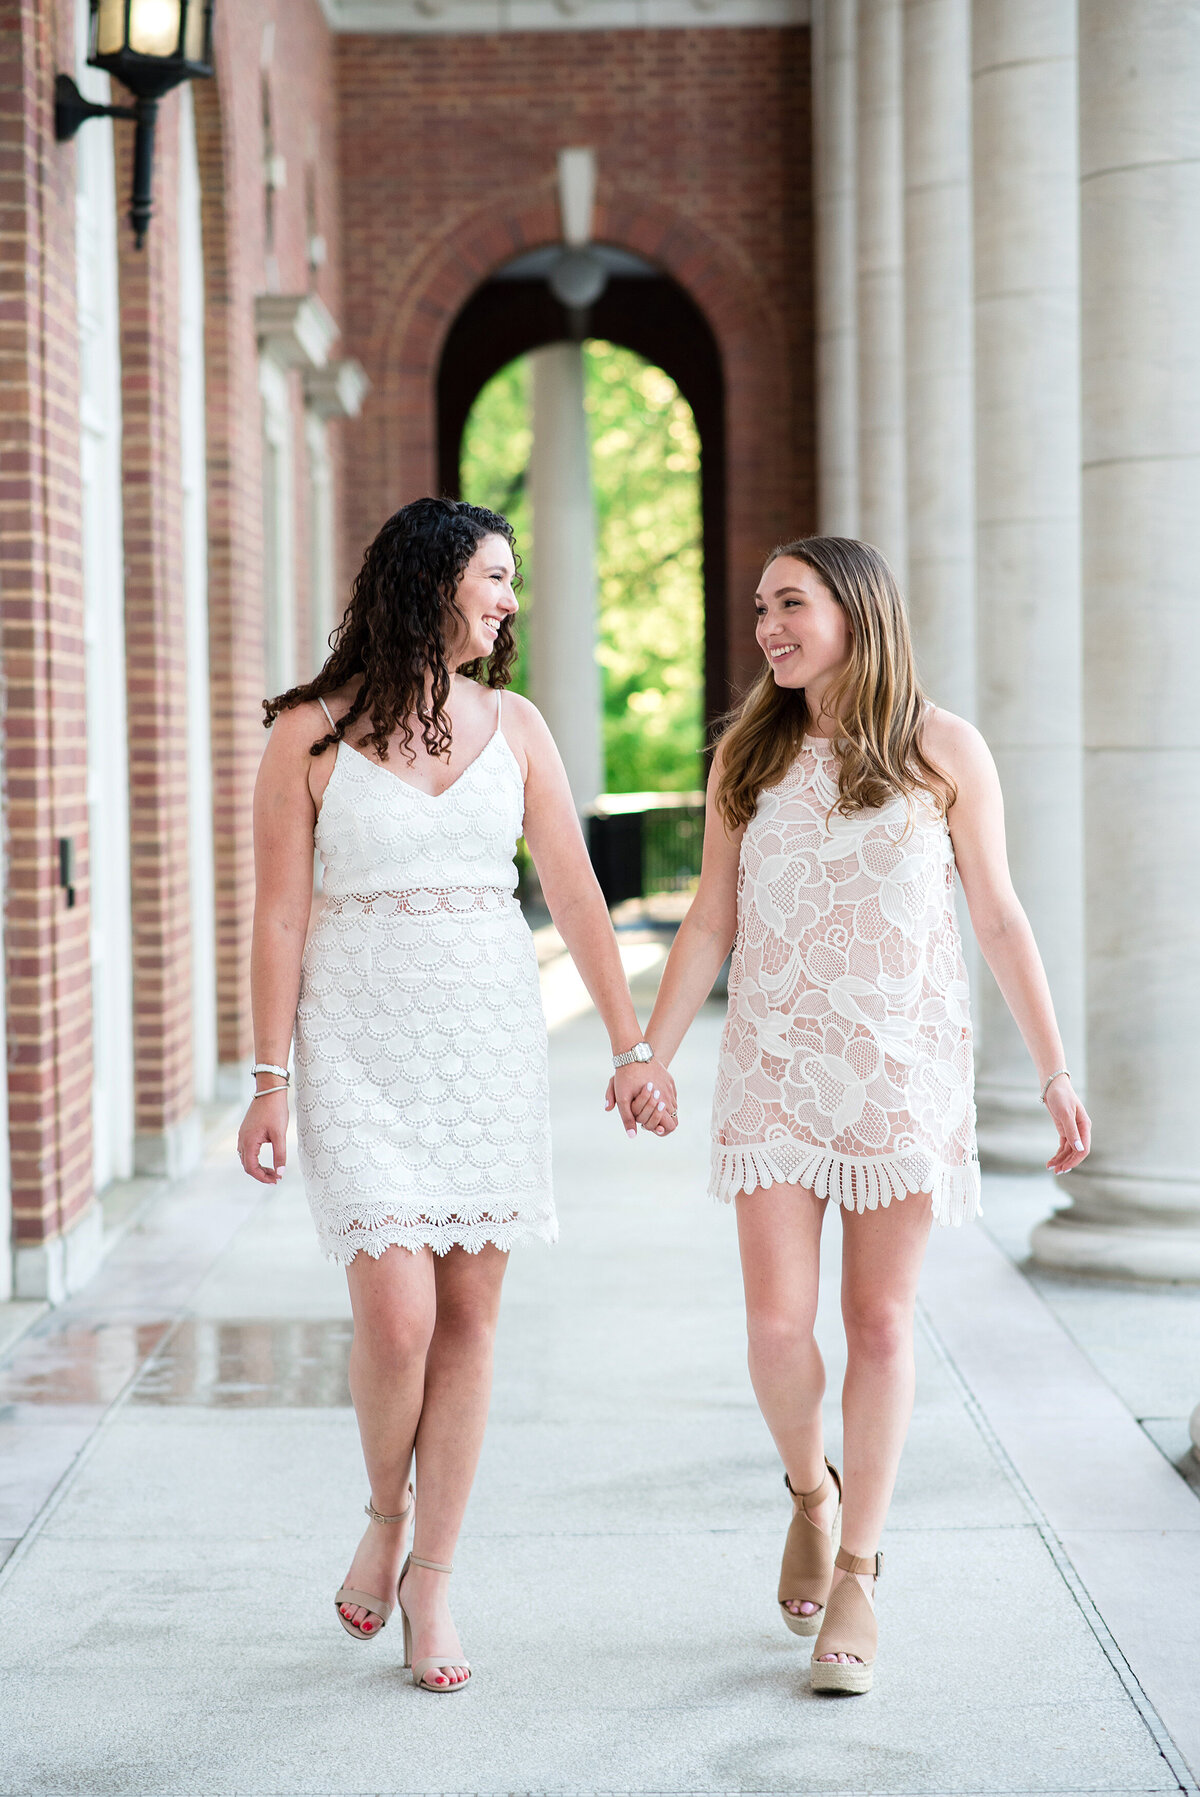 2 Best friends holding hands wearing cream mini dresses and walking together on the Vanderbilt campus near large pillars